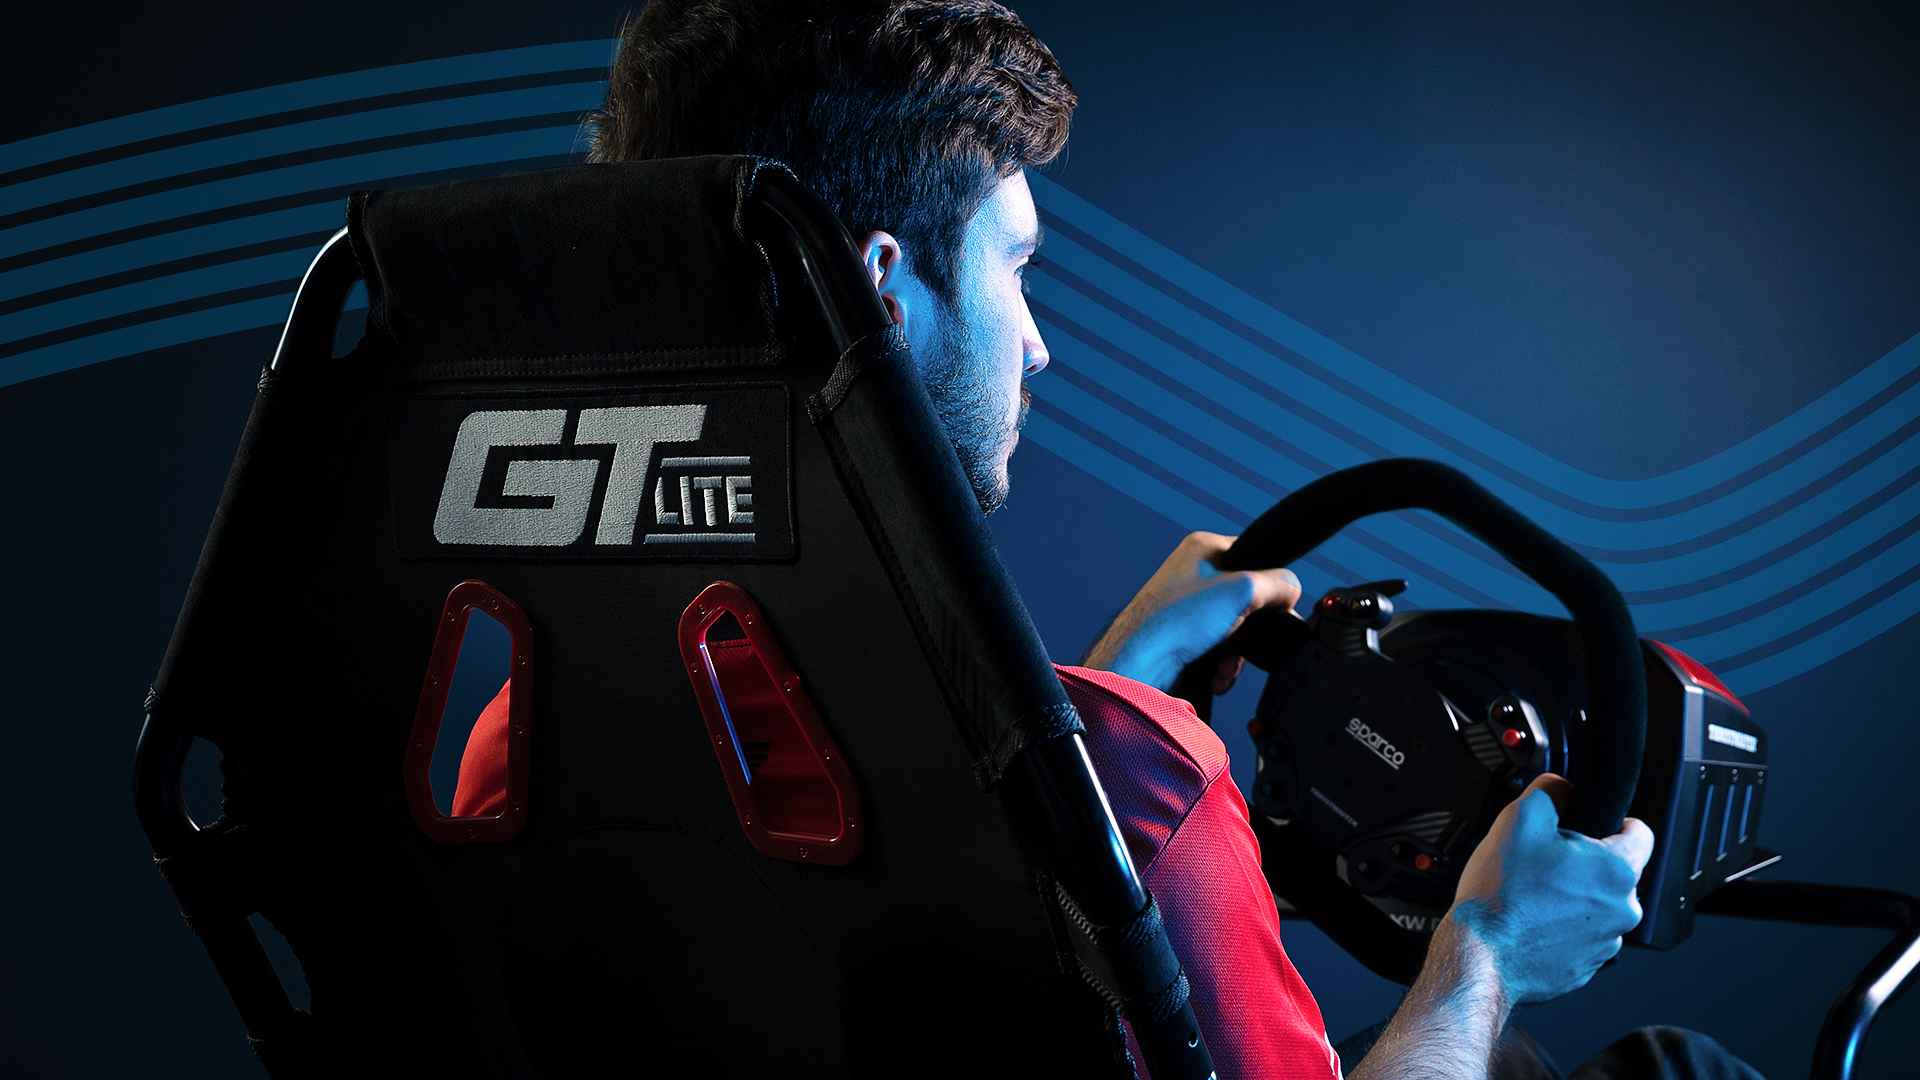 Gt Lite Prduct Vieo Cover 11zon